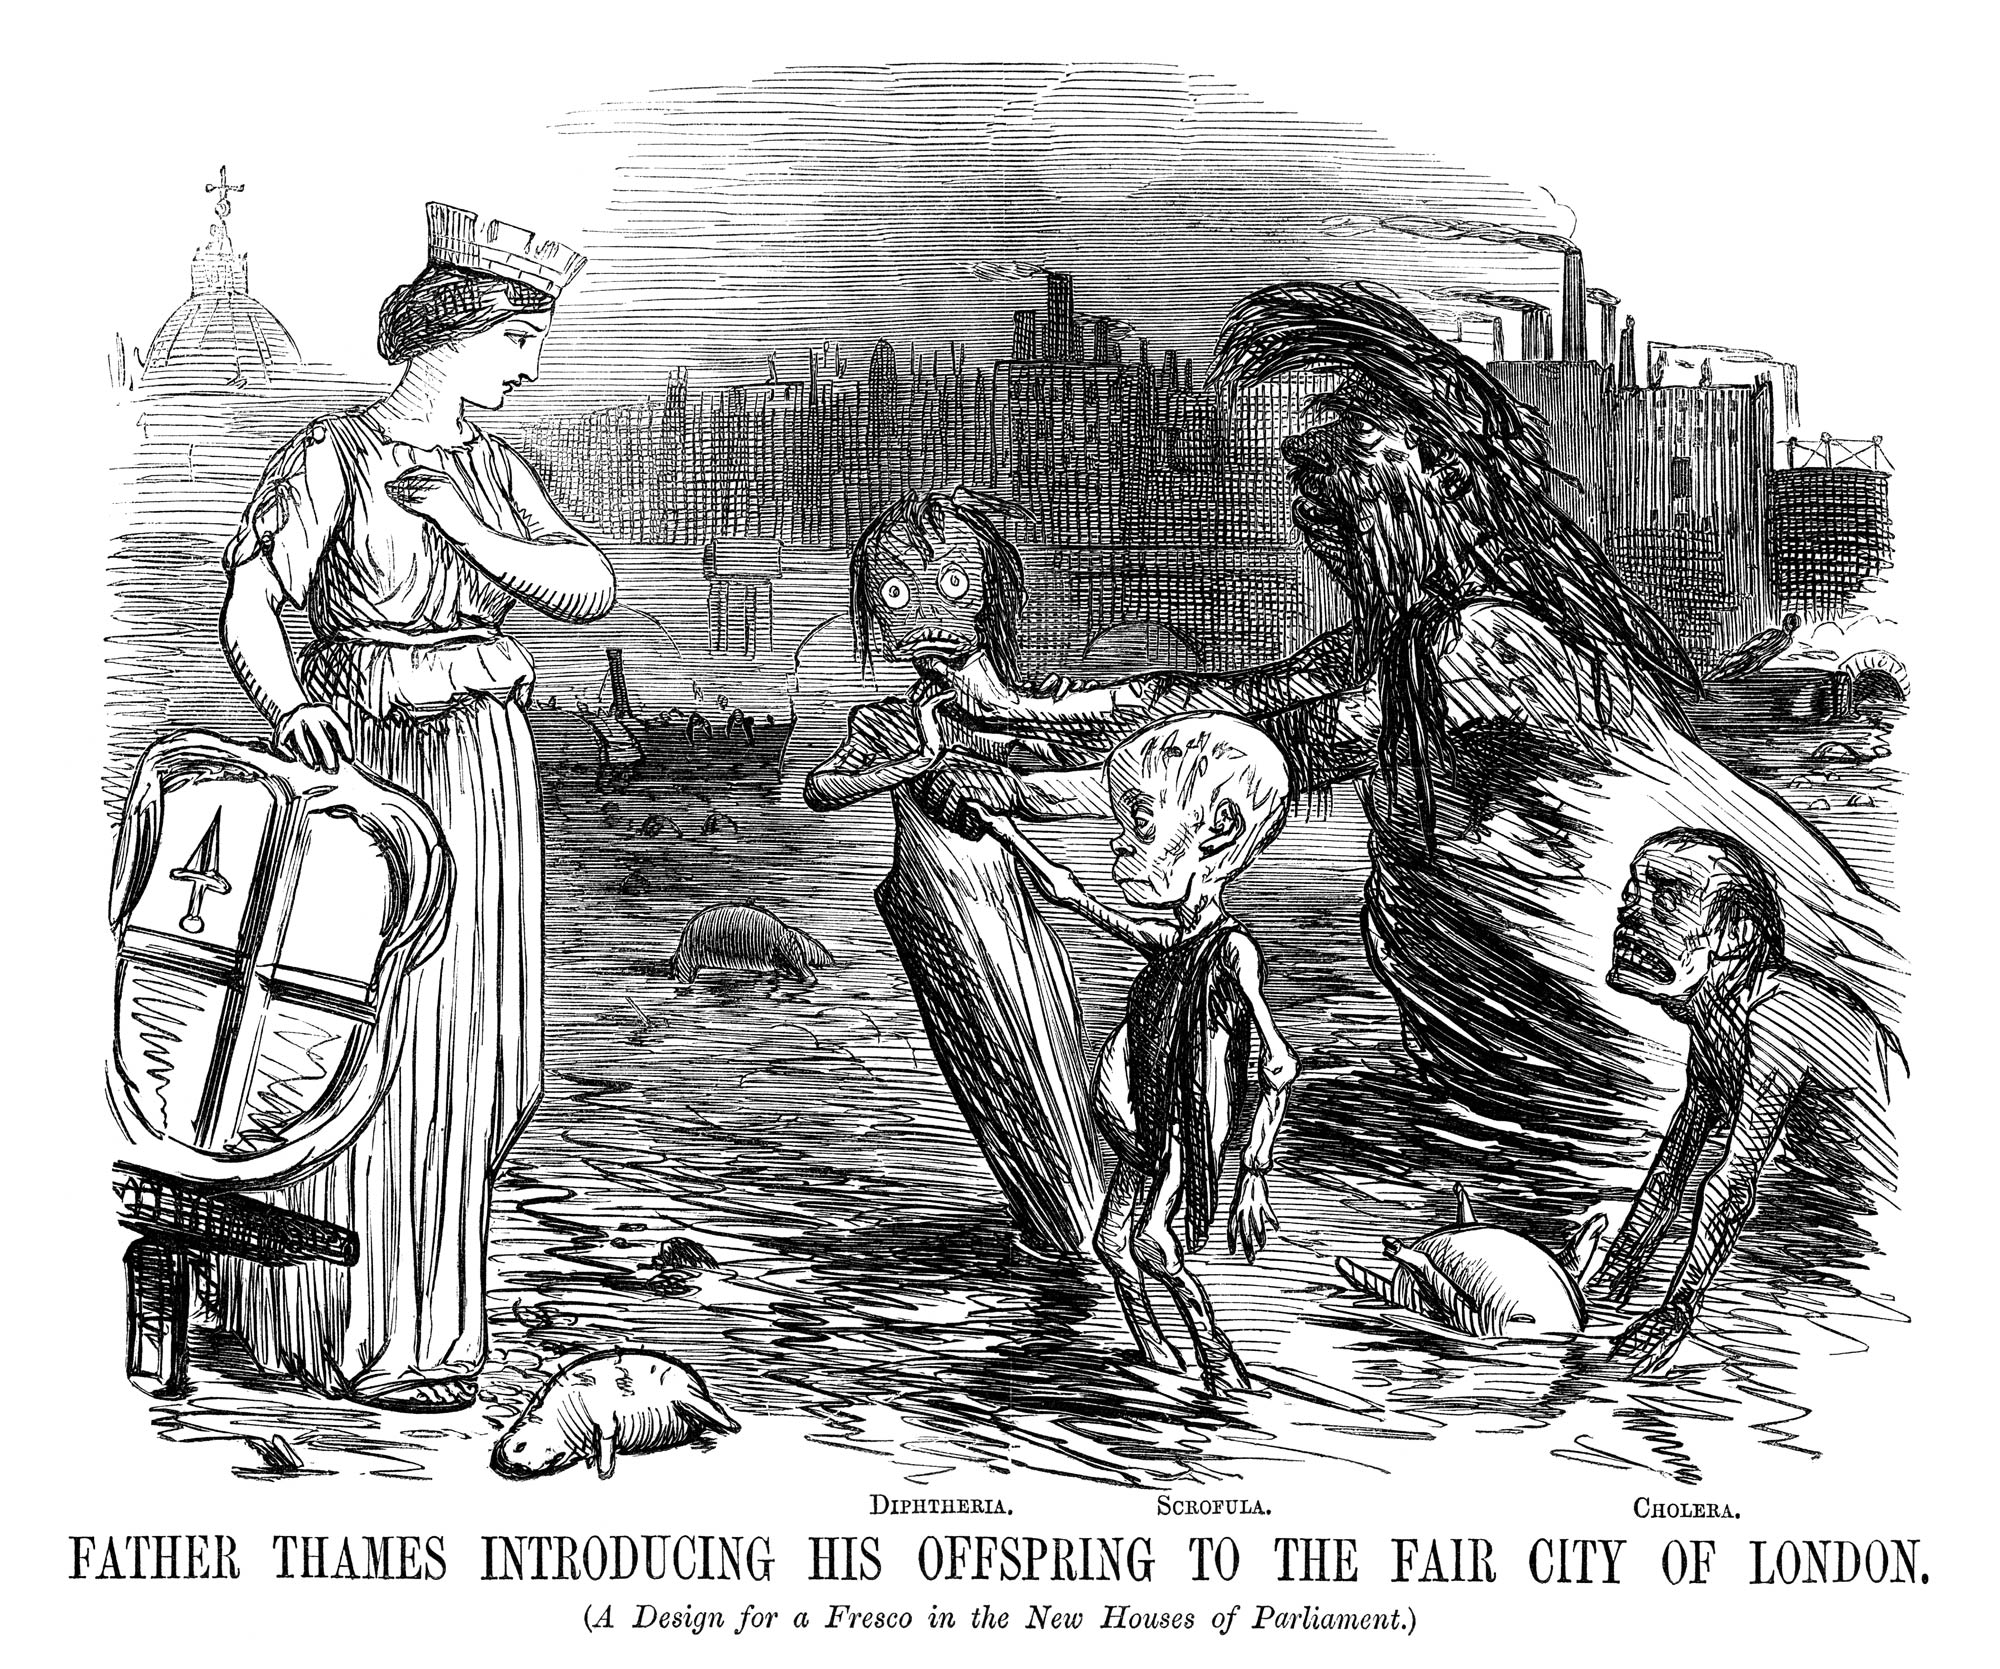 Father Thames Introducing his Offspring to the Fair City of London, [Punch (1858)](https://www.bl.uk/collection-items/father-thames-introducing-his-offspring-to-the-fair-city-of-london-from-punch)